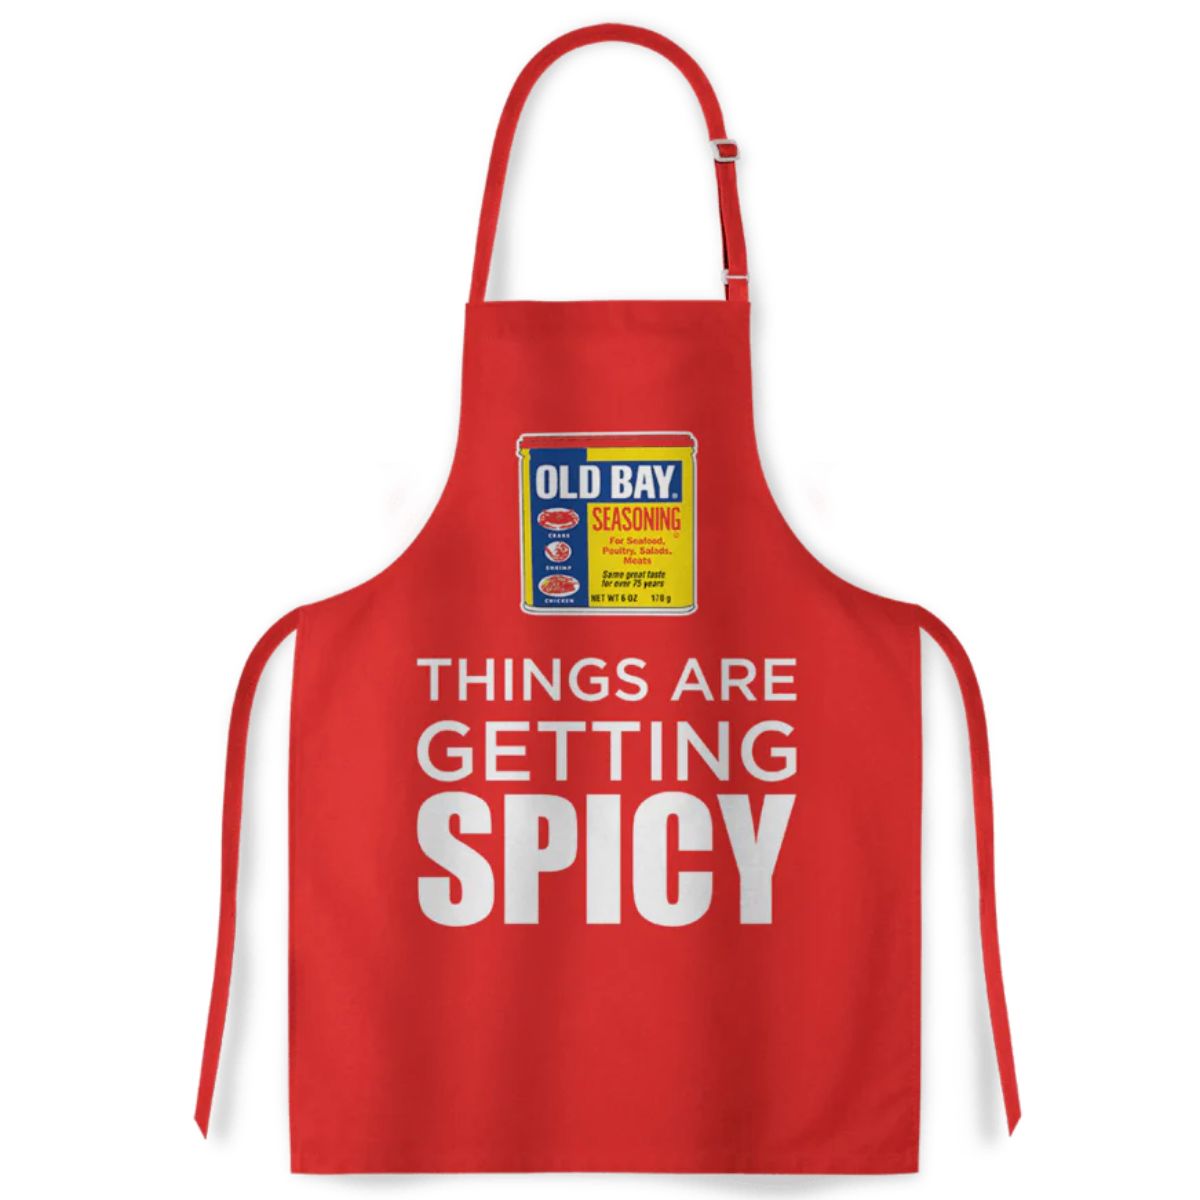 "Things Are Getting Spicy" Apron- Perfect gift for the cook